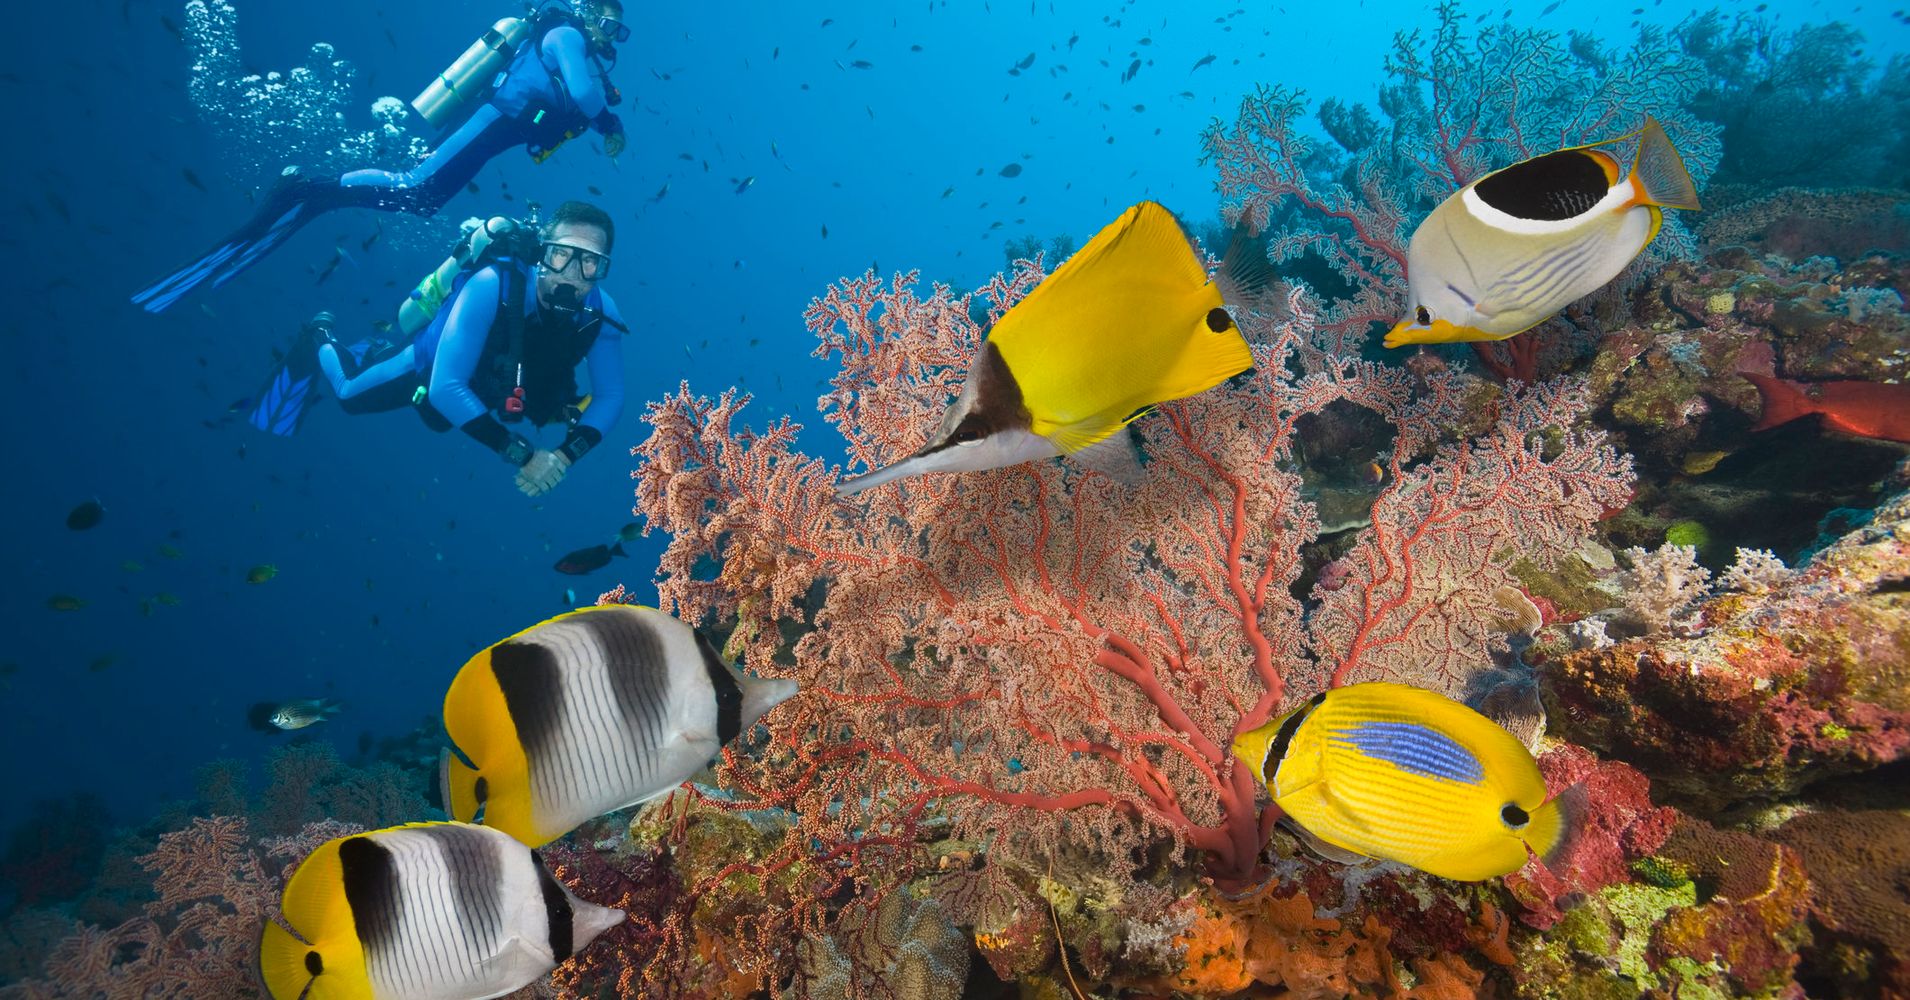 15 Of The Best Dive Spots In The World  HuffPost